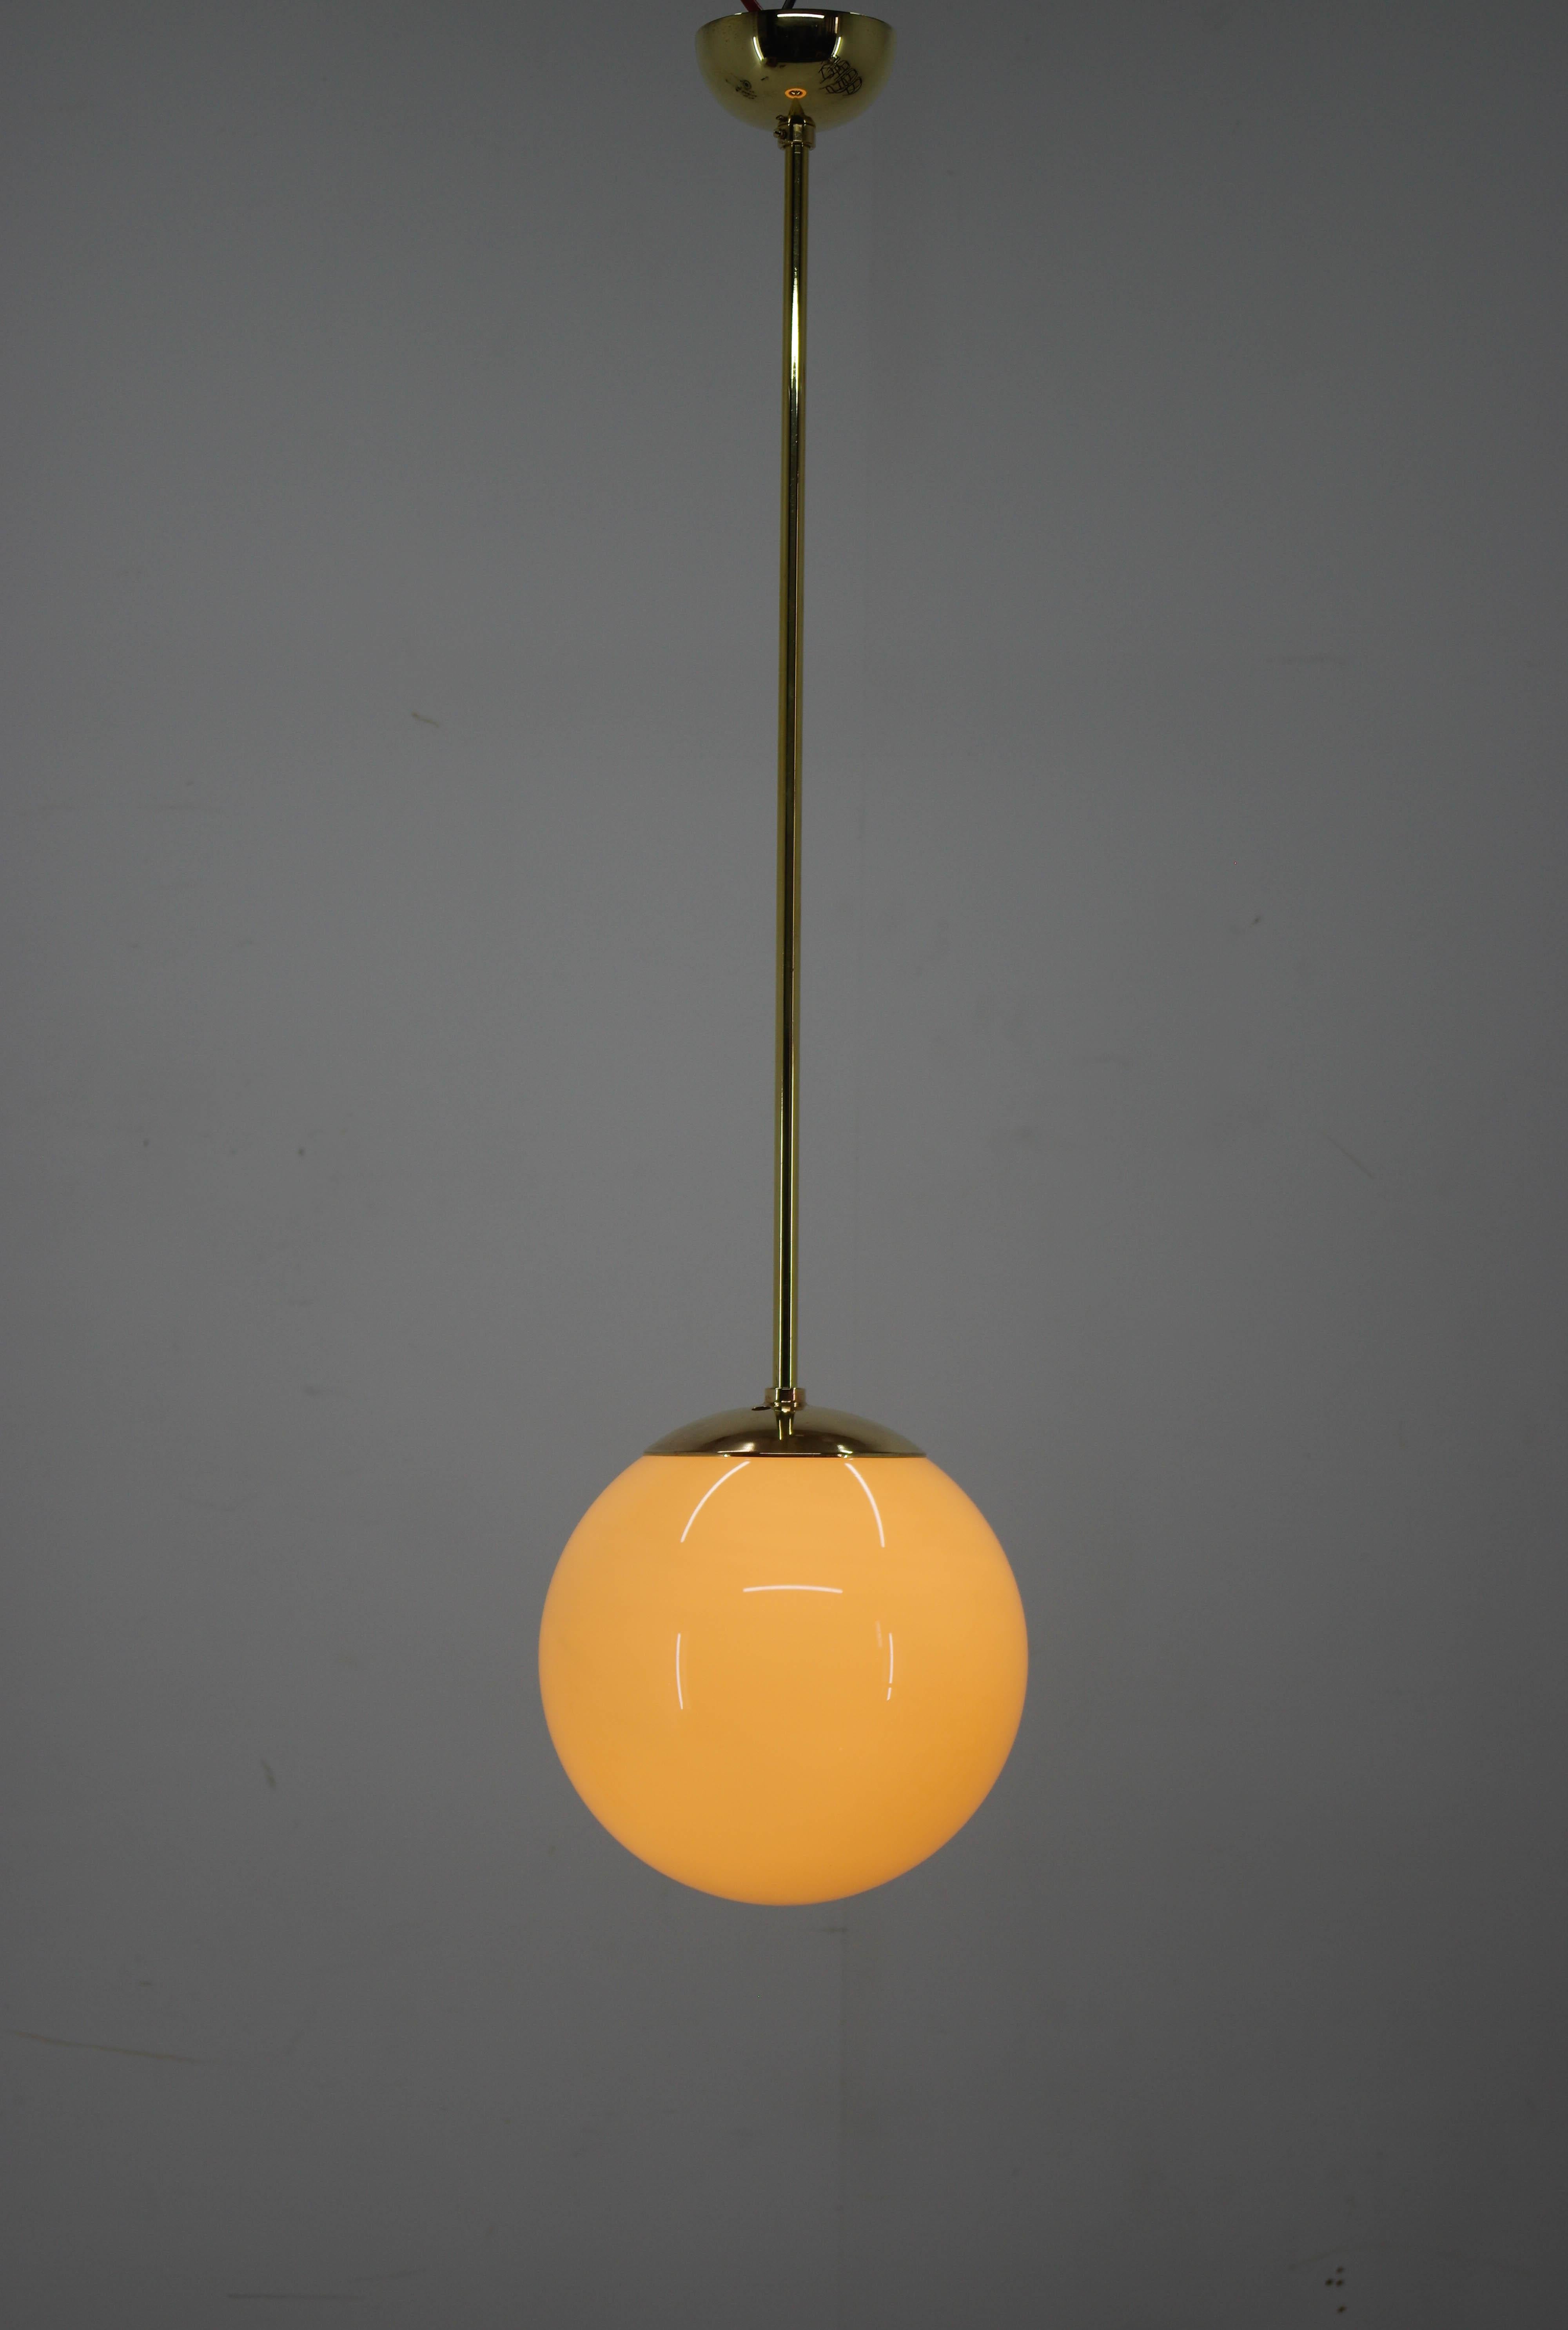 Simple Bauhaus/Functionalist brass and blown glass pendant.
Restored, brass polished, rewired - 1x60W, E25-E27 bulb
US wiring compatible